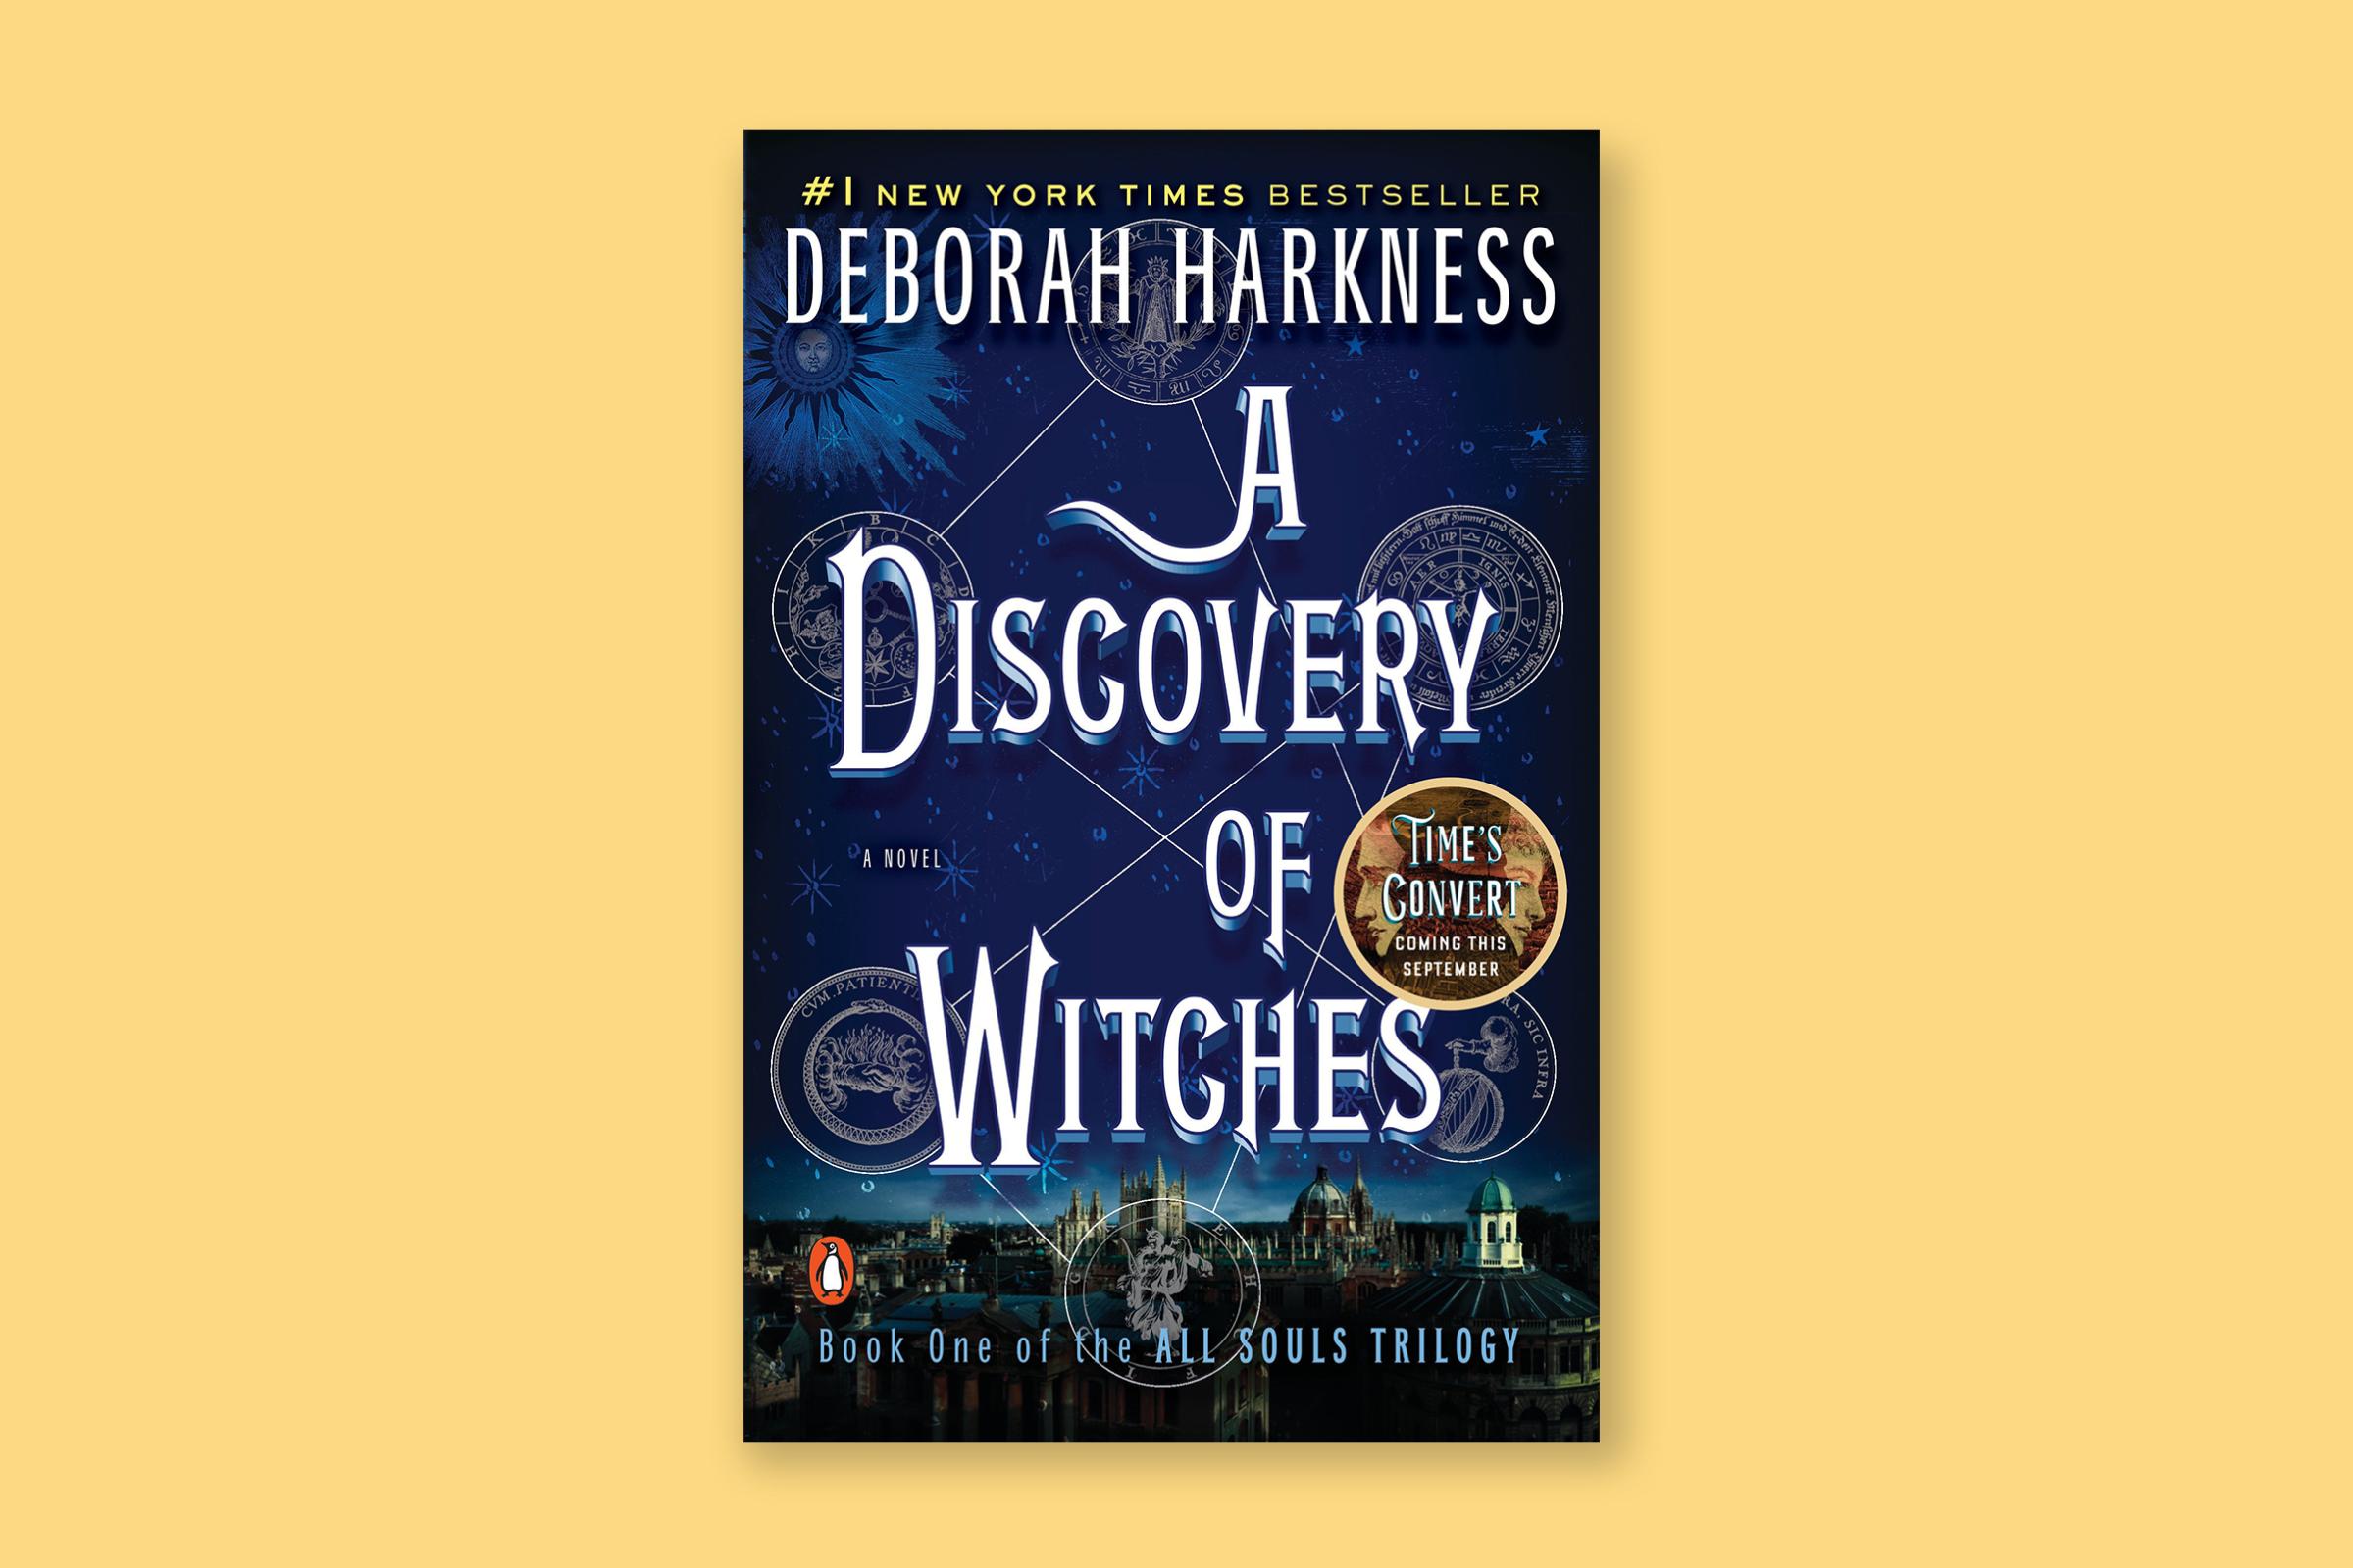 A-Discovery-of-Witches-Deborah-Harkness